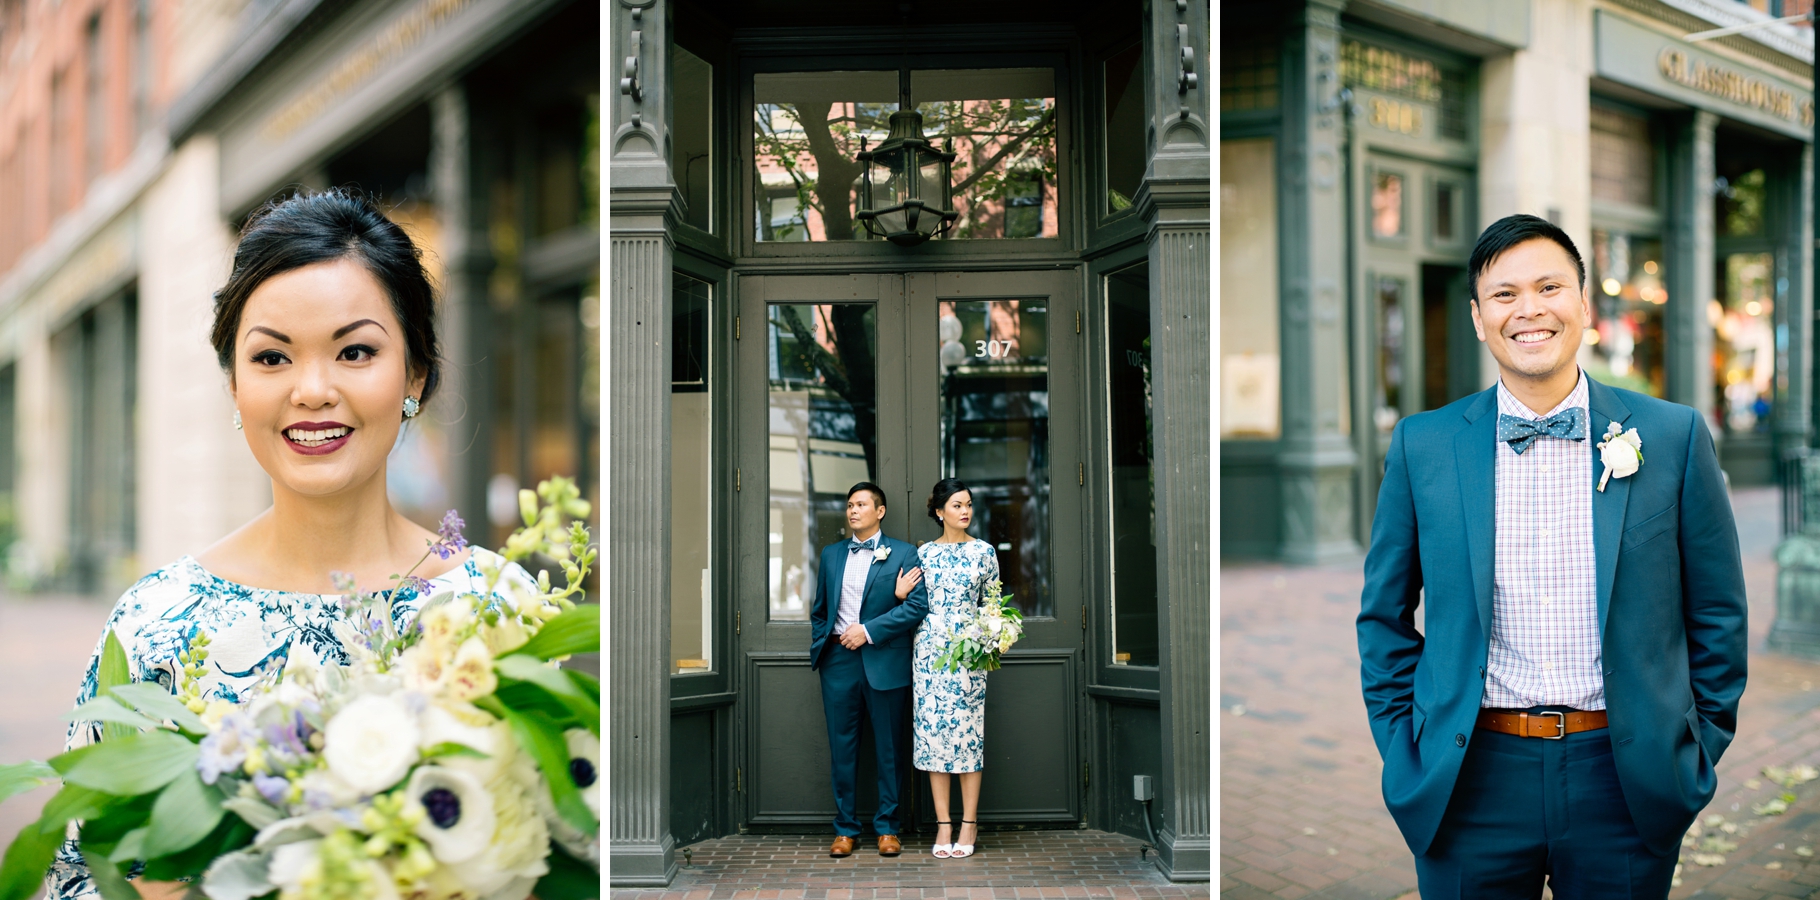 7-Bride-Groom-Romantic-Editorial-Portraits-Wedding-Bouquet-White-Blue-Florals-Occidental-Park-Pioneer-Square-Seattle-Wedding-Day-Photographer-Photography-by-Betty-Elaine